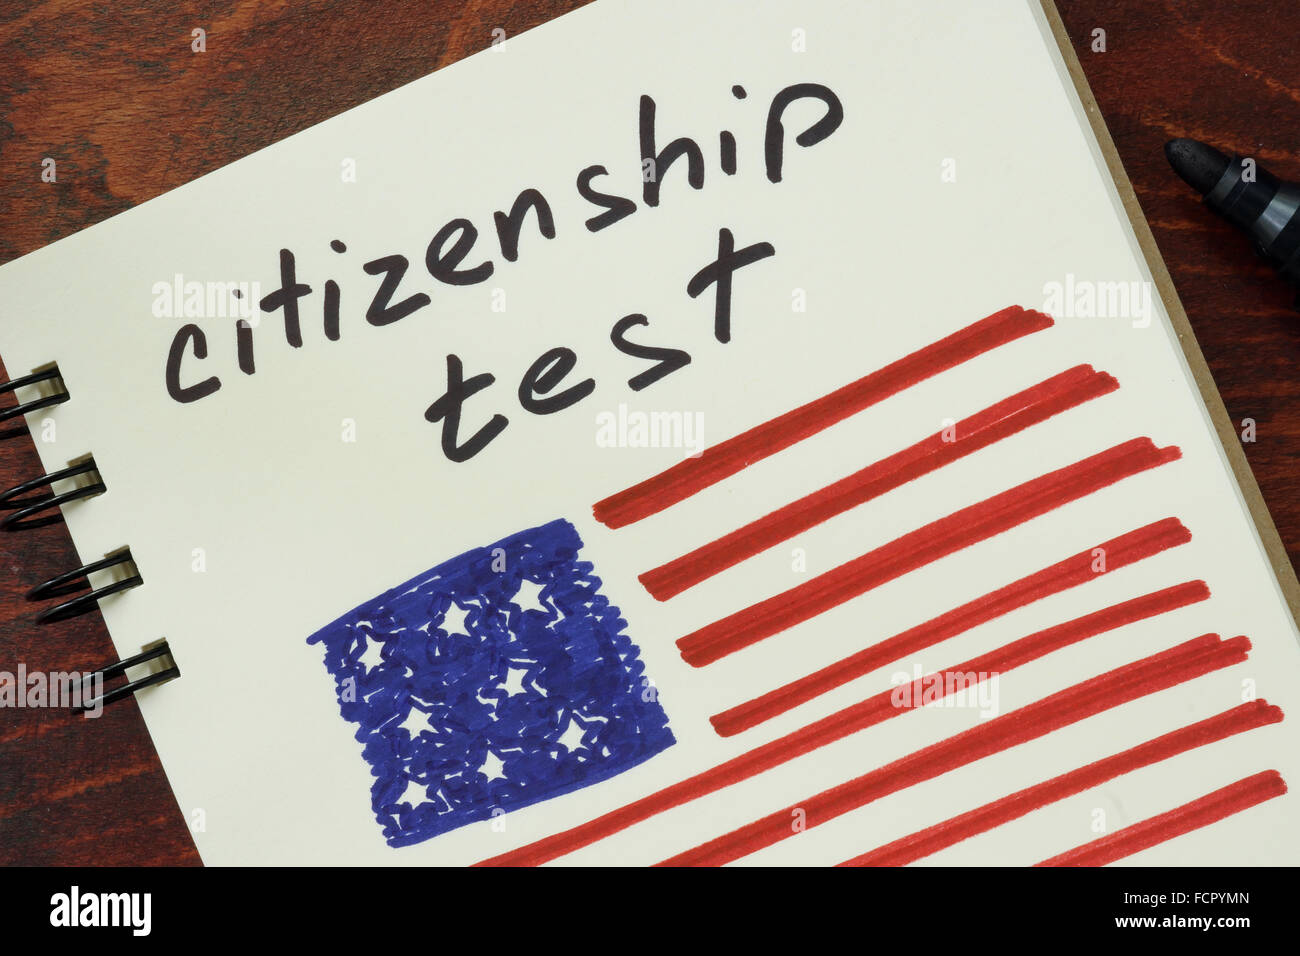 Notepad with words  citizenship test and American flag. Stock Photo